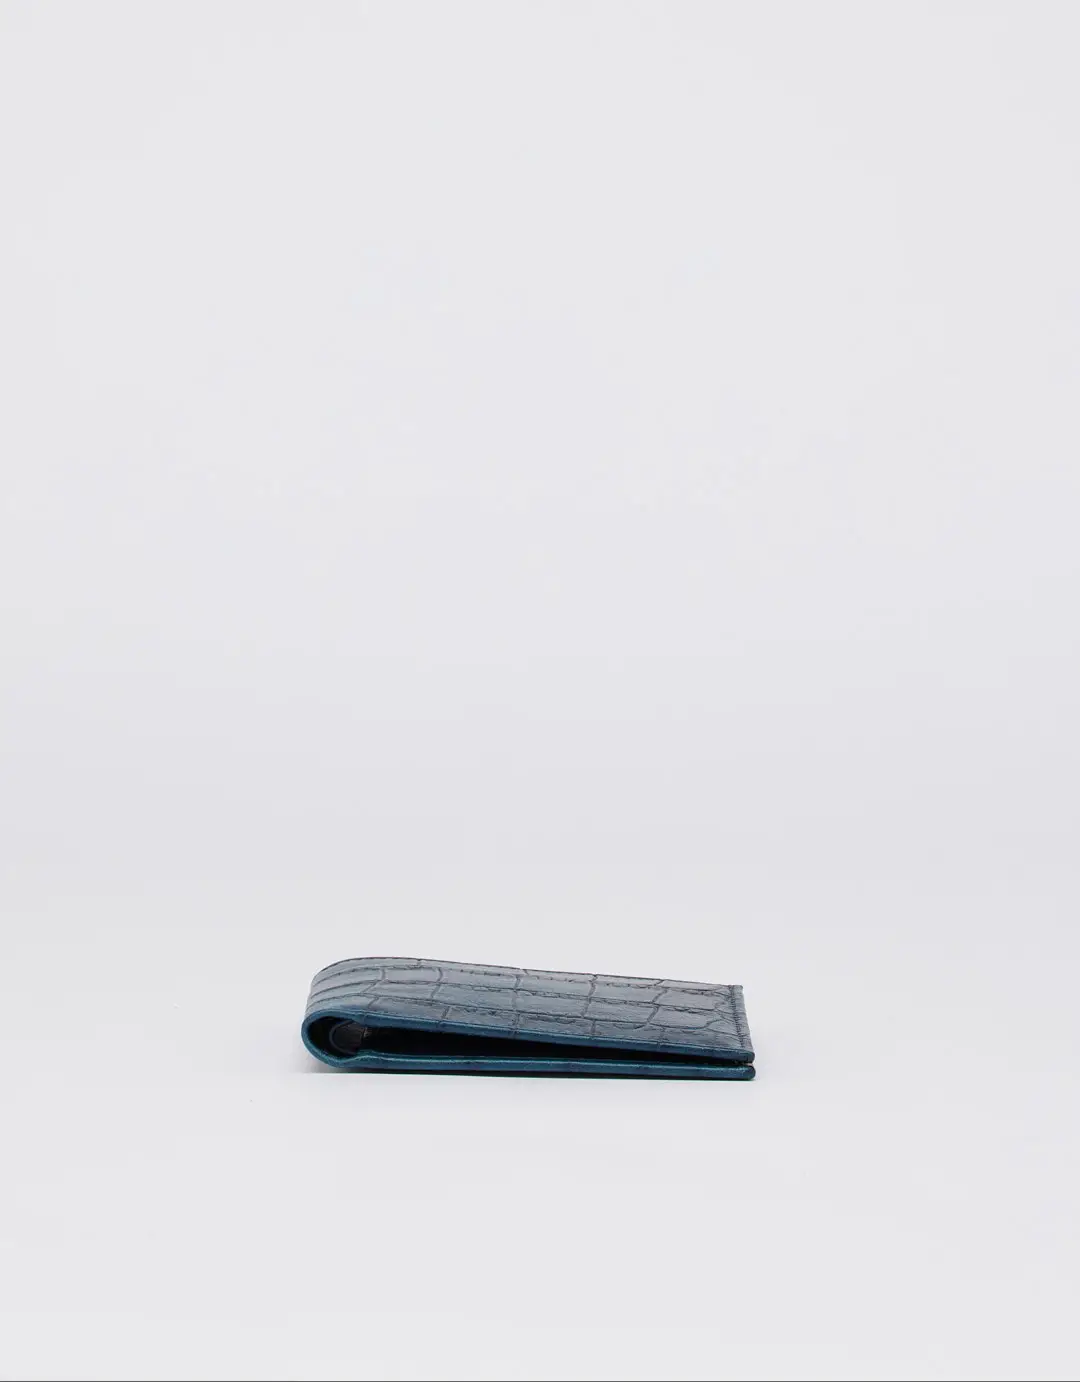 This beautiful wallet is Pleasantly compact and thin, this leather wallet will hold your essentials and slip easily into a pocket.
The Croco print on this wallet makes it look elegant and timeless. It has a minimalist design and is made of high-quality calf leather. It has eight card slots and two compartments for bills.